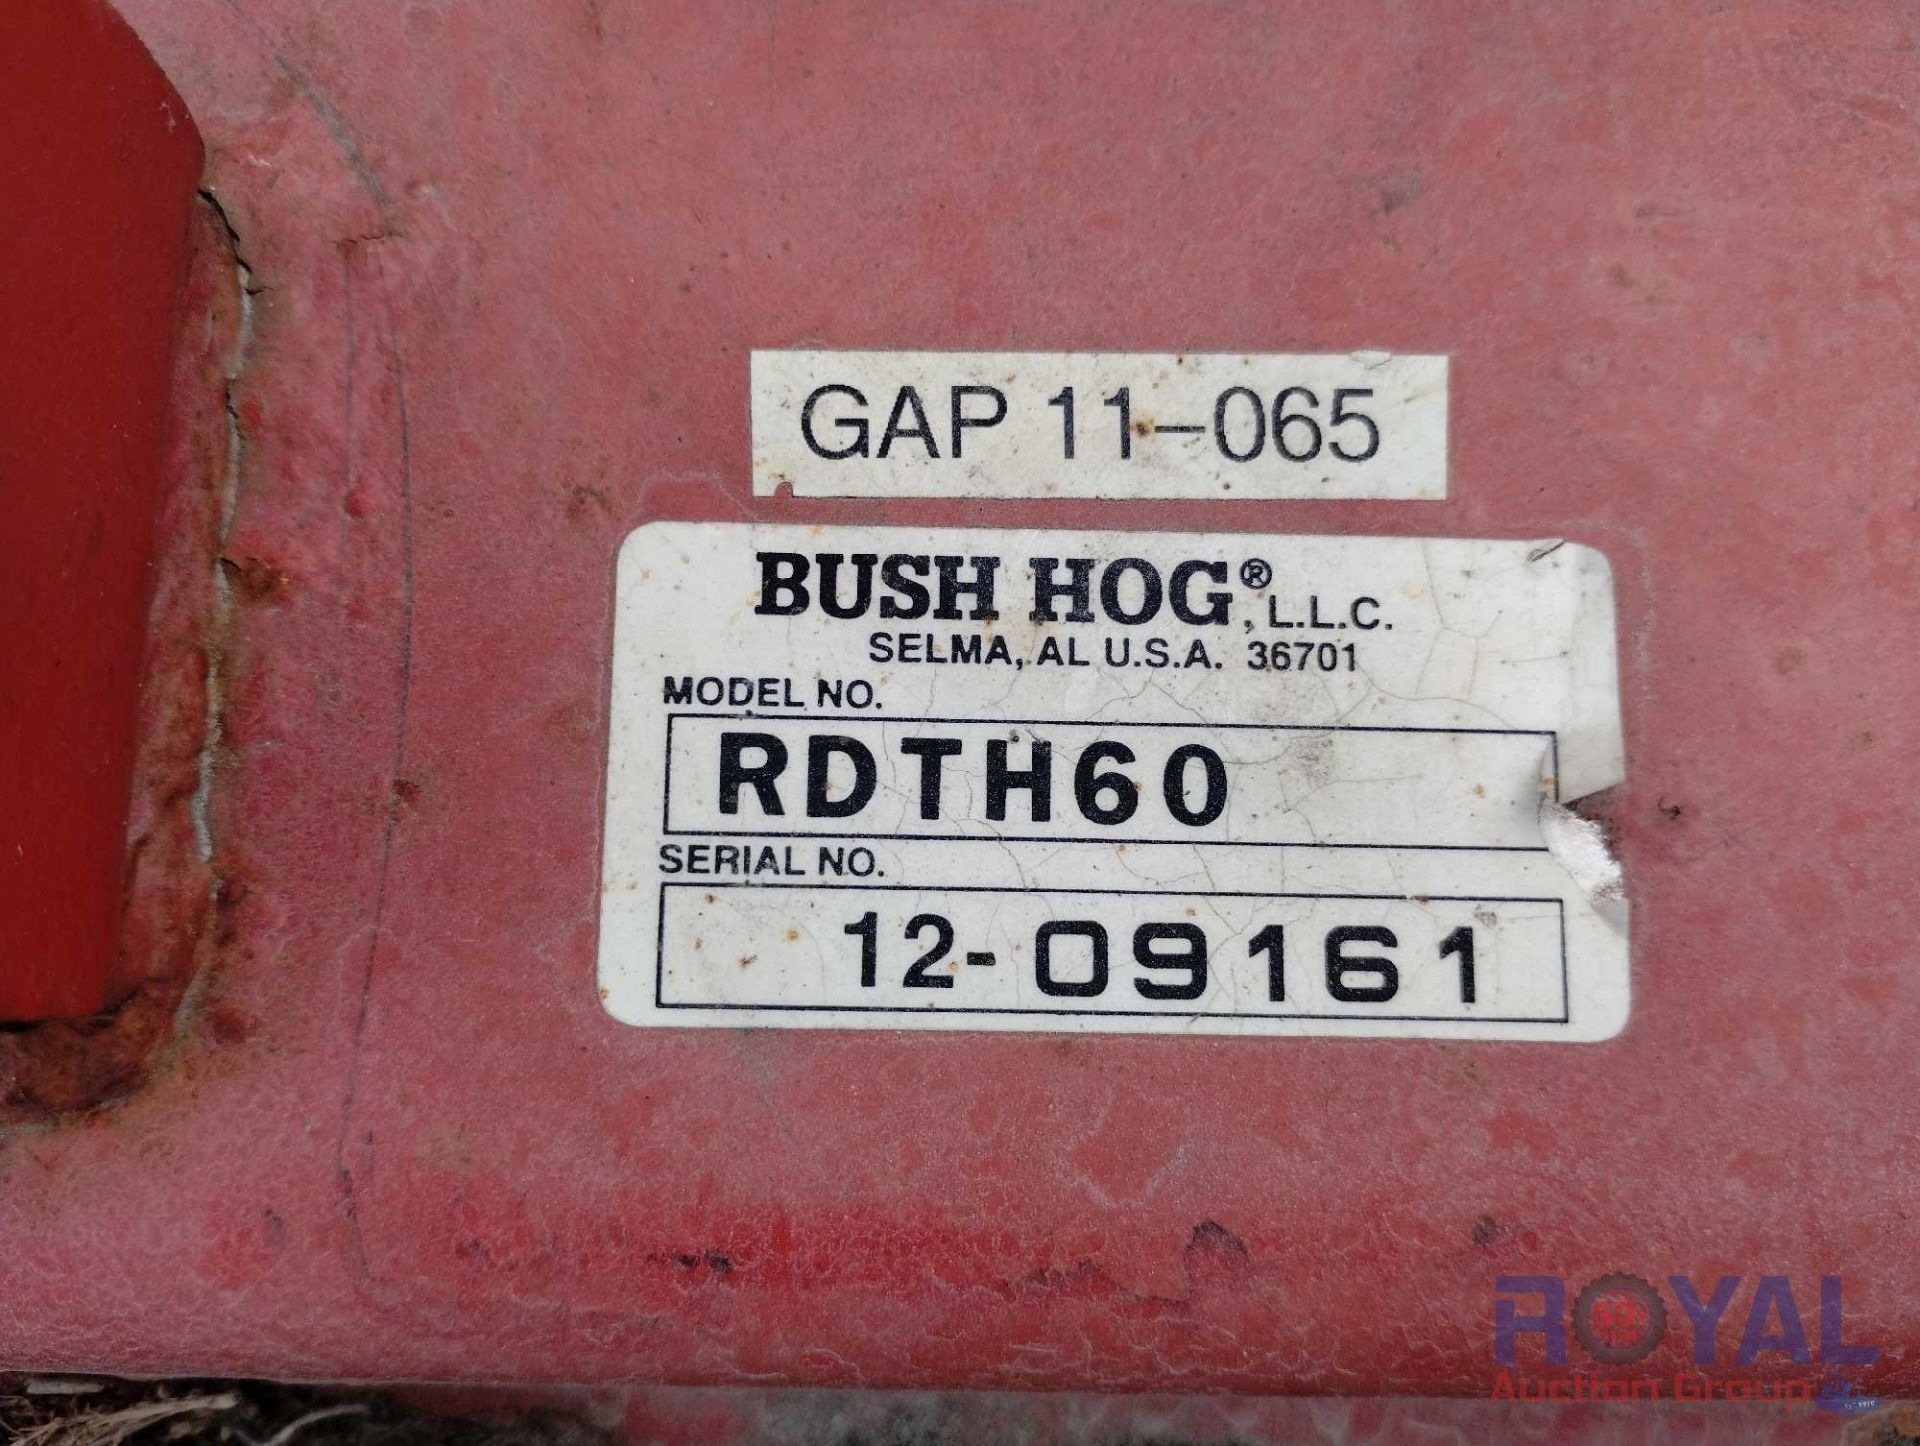 Bush Hog RDTH60 Mower Tractor Attachment - Image 4 of 6